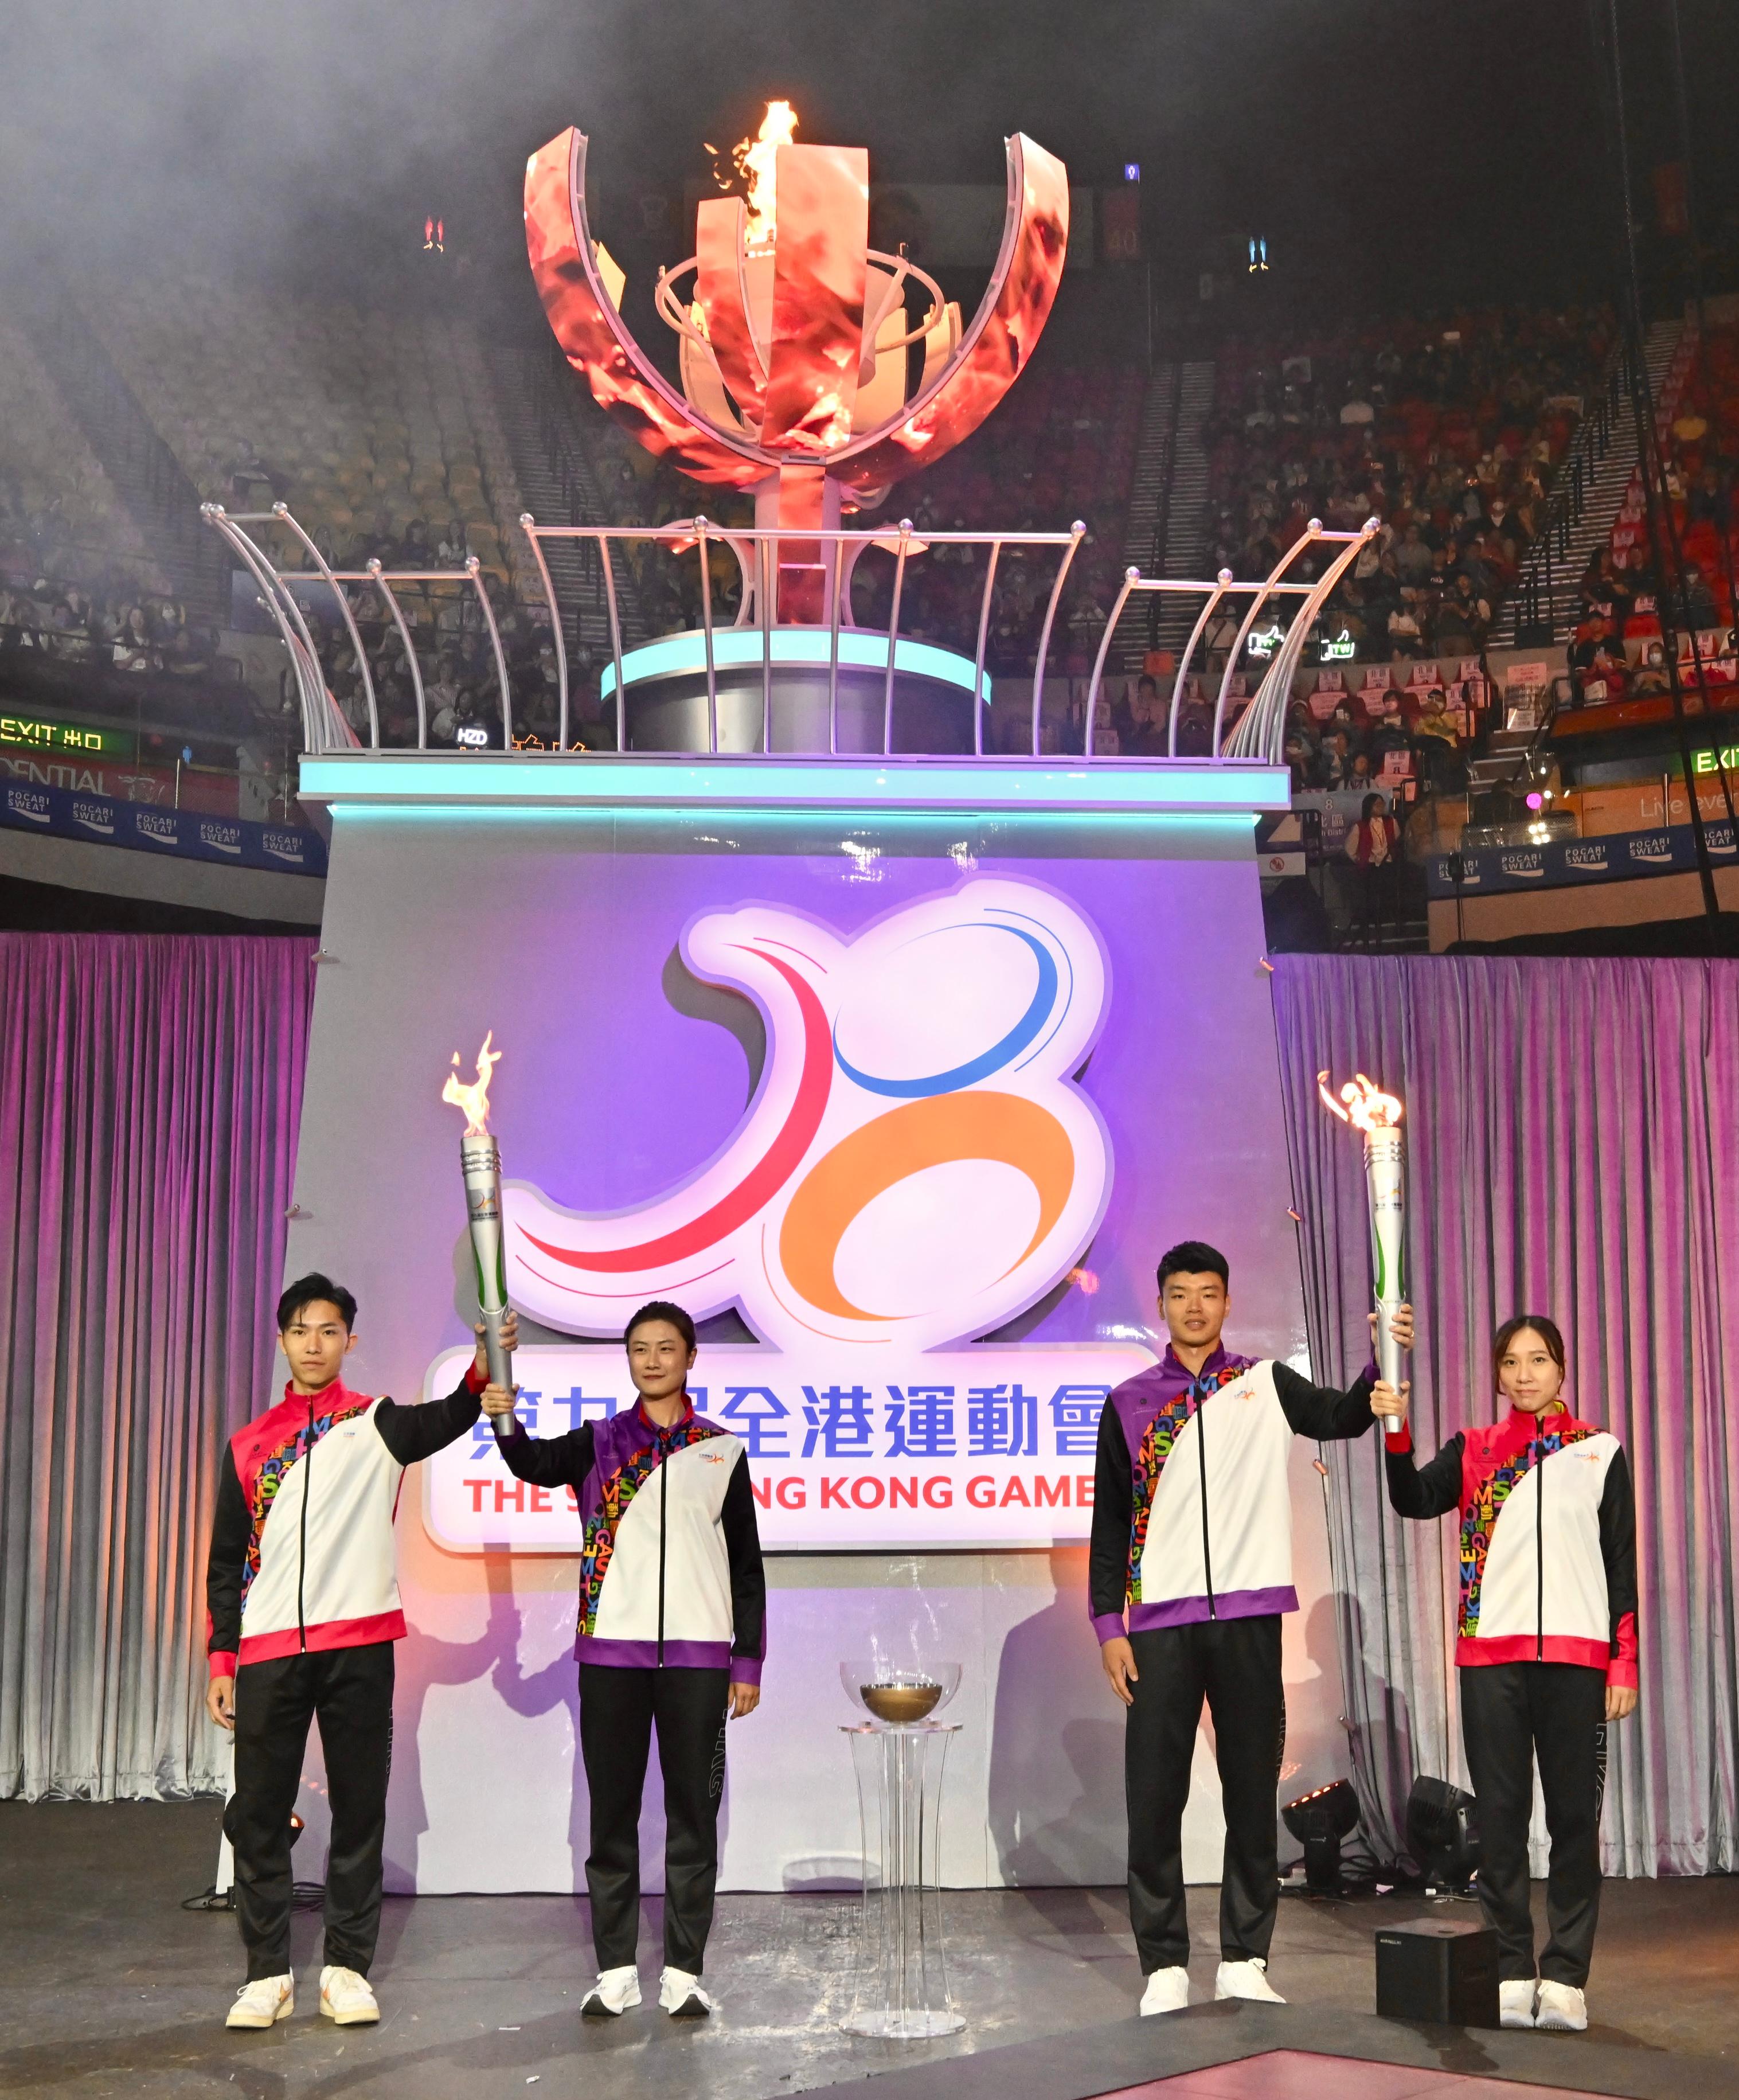 Mainland Olympic gold medallists Ding Ning (second left) and Wang Yilyu (second right) and Hong Kong medallists Samuel Hui (first left) and Minnie Soo (first right) light the cauldron at the 9th Hong Kong Games Opening Ceremony today (April 21).